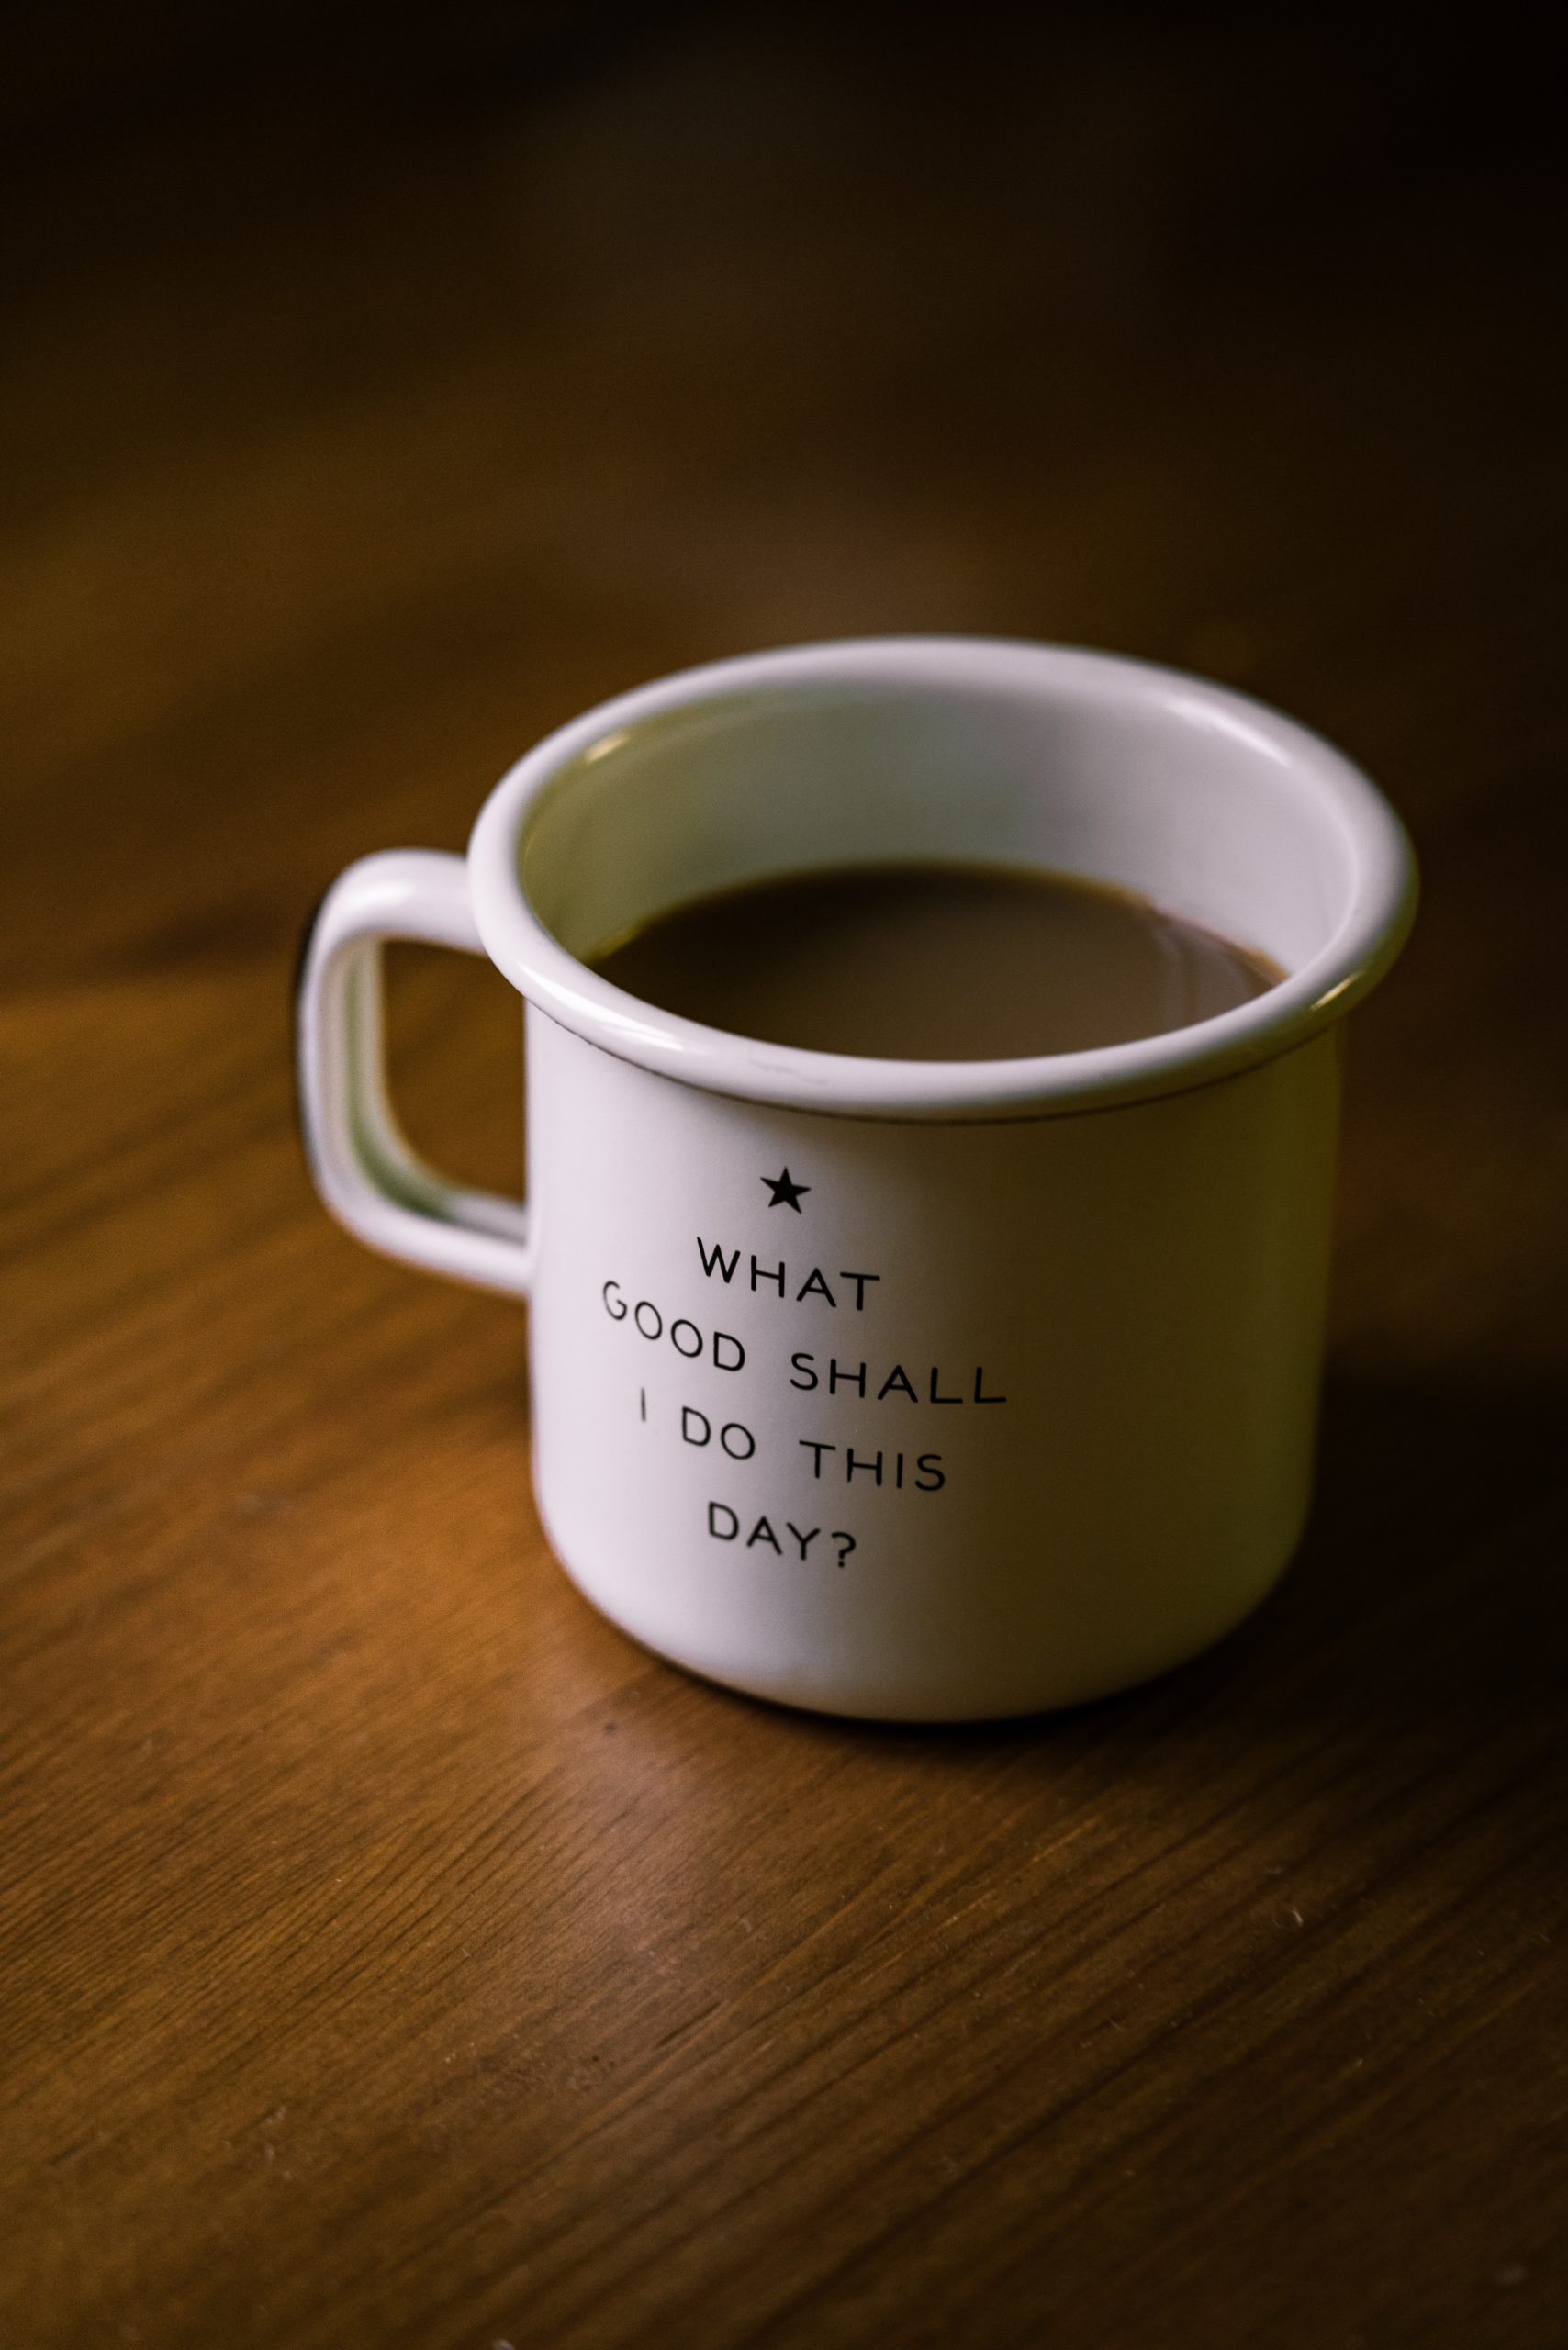 "What Good Shall I Do This Day" written on a mug sitting on a table